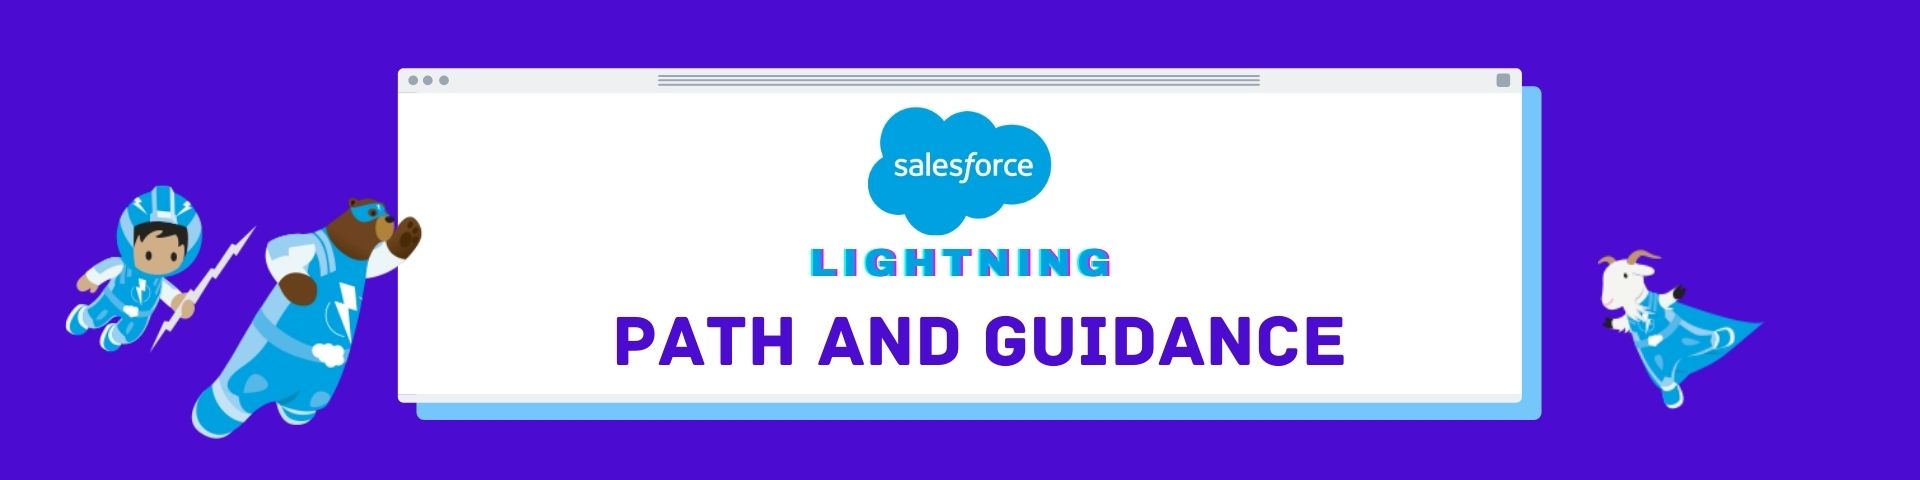 Salesforce Lightning path and guidance